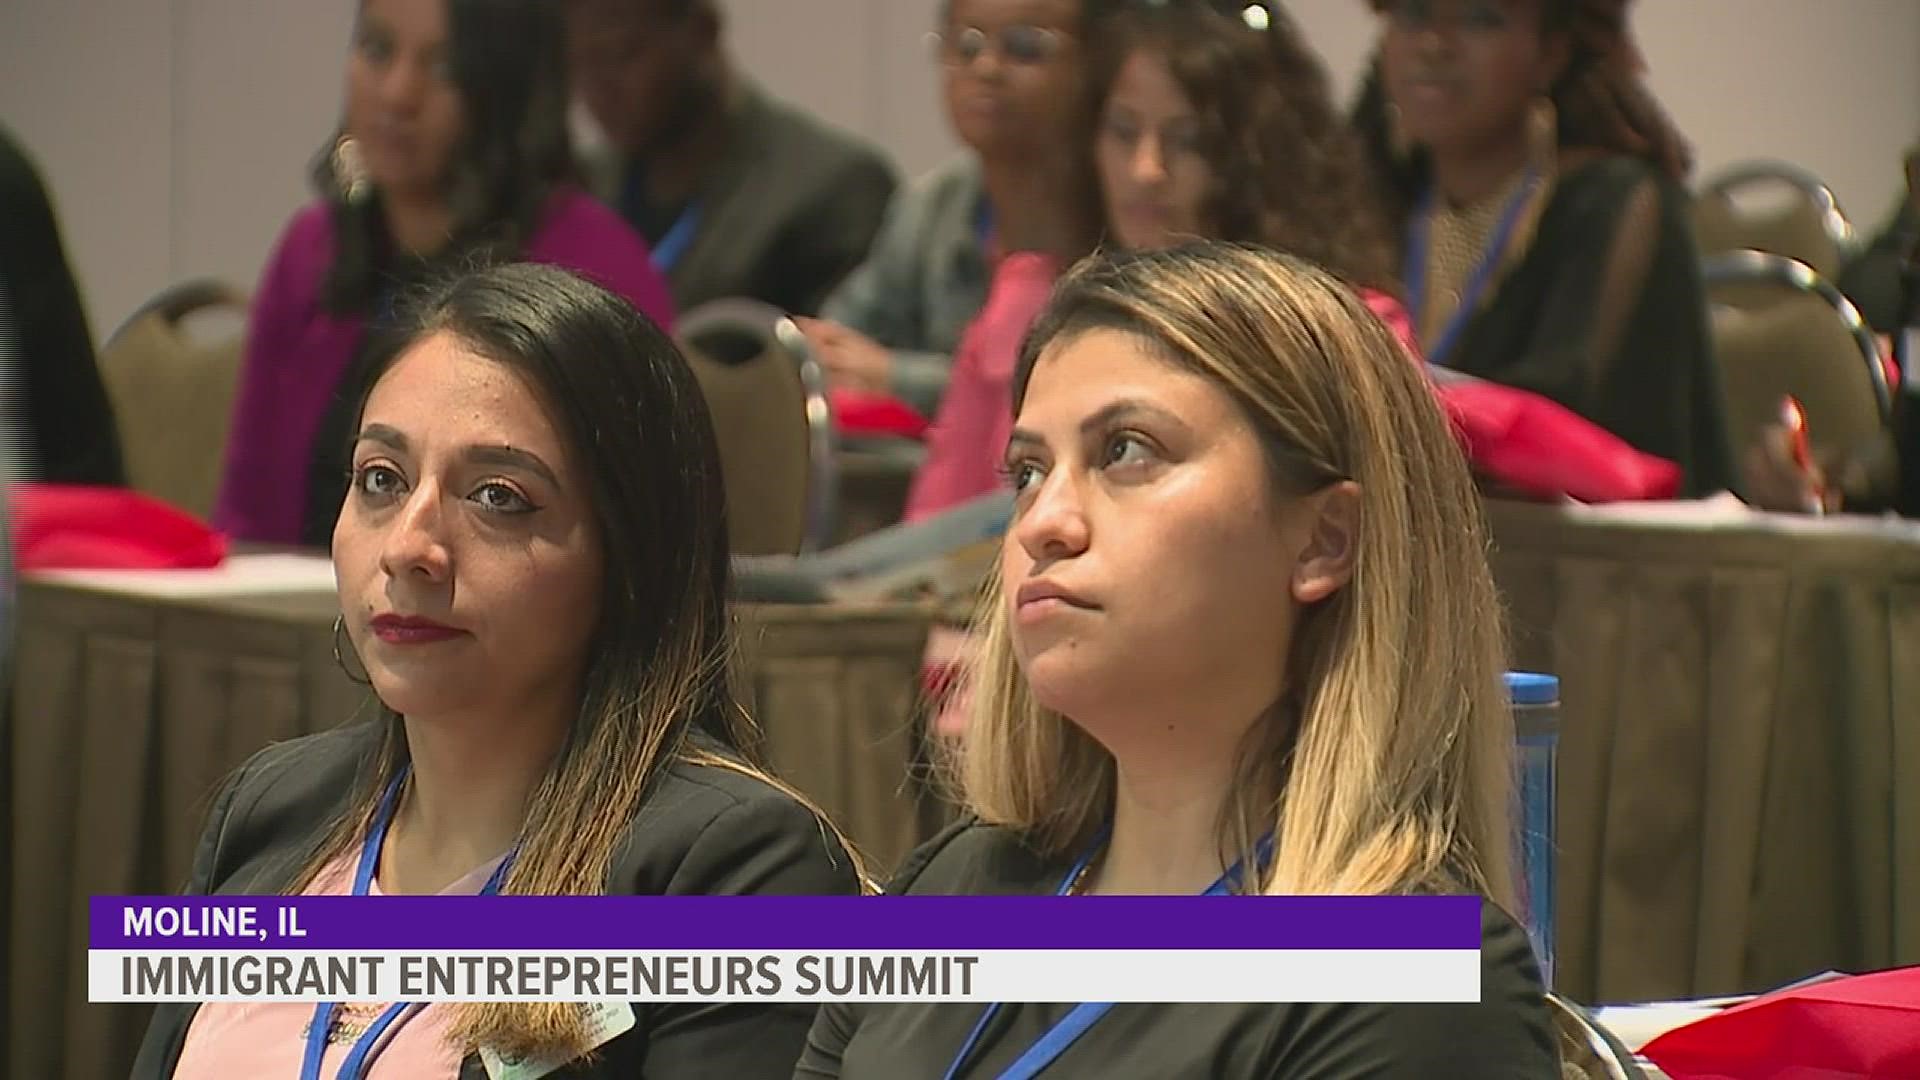 The event held by Immigrant Entrepreneurs Summit focused on post-COVID recovery for minority business owners.